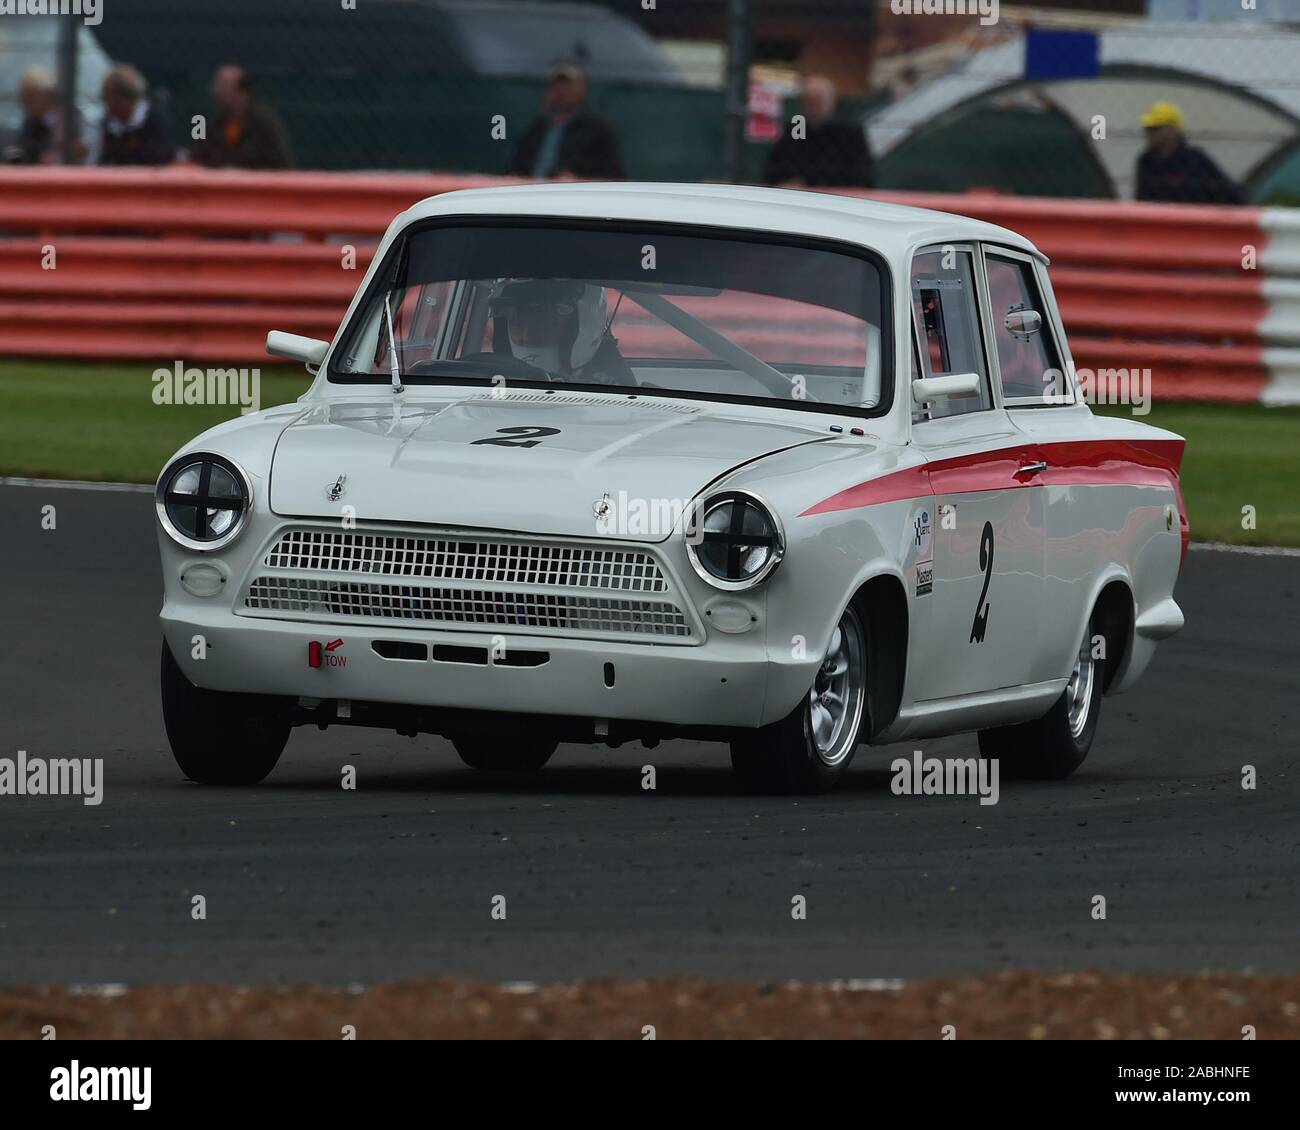 Neil Brown, Ford Lotus Cortina, Transatlantic Trophy for Pre '66 Touring Cars, Silverstone Classic, July 2019, Silverstone, Northamptonshire, England, Stock Photo